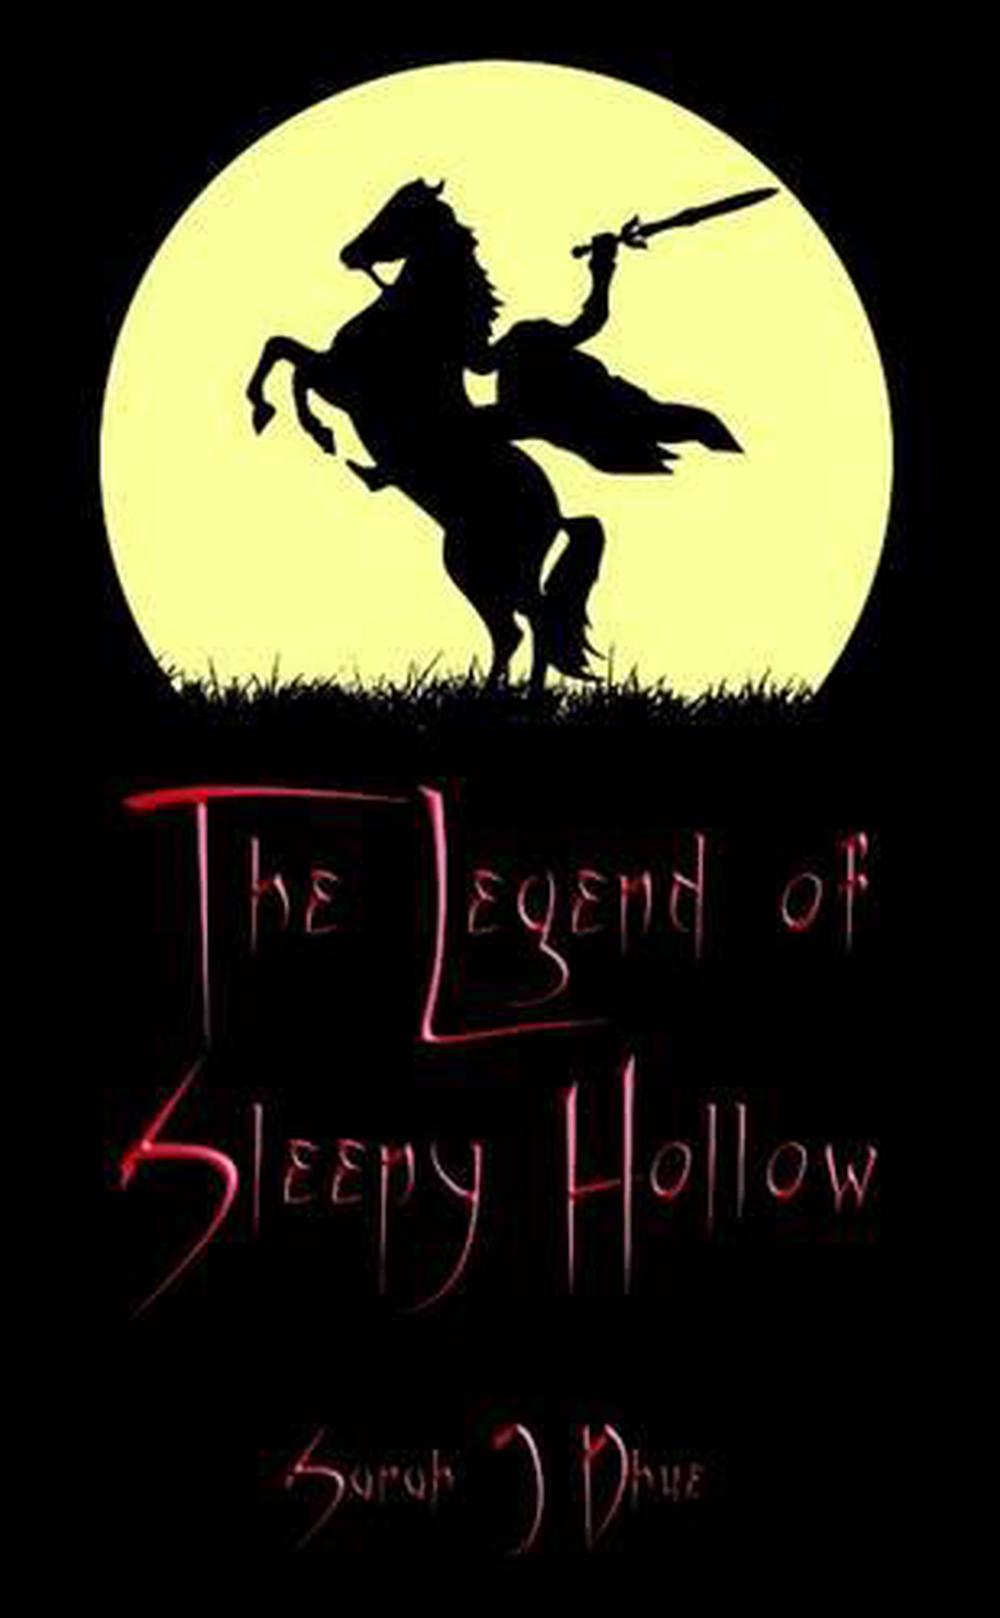 the legend of hollow story by washington irving